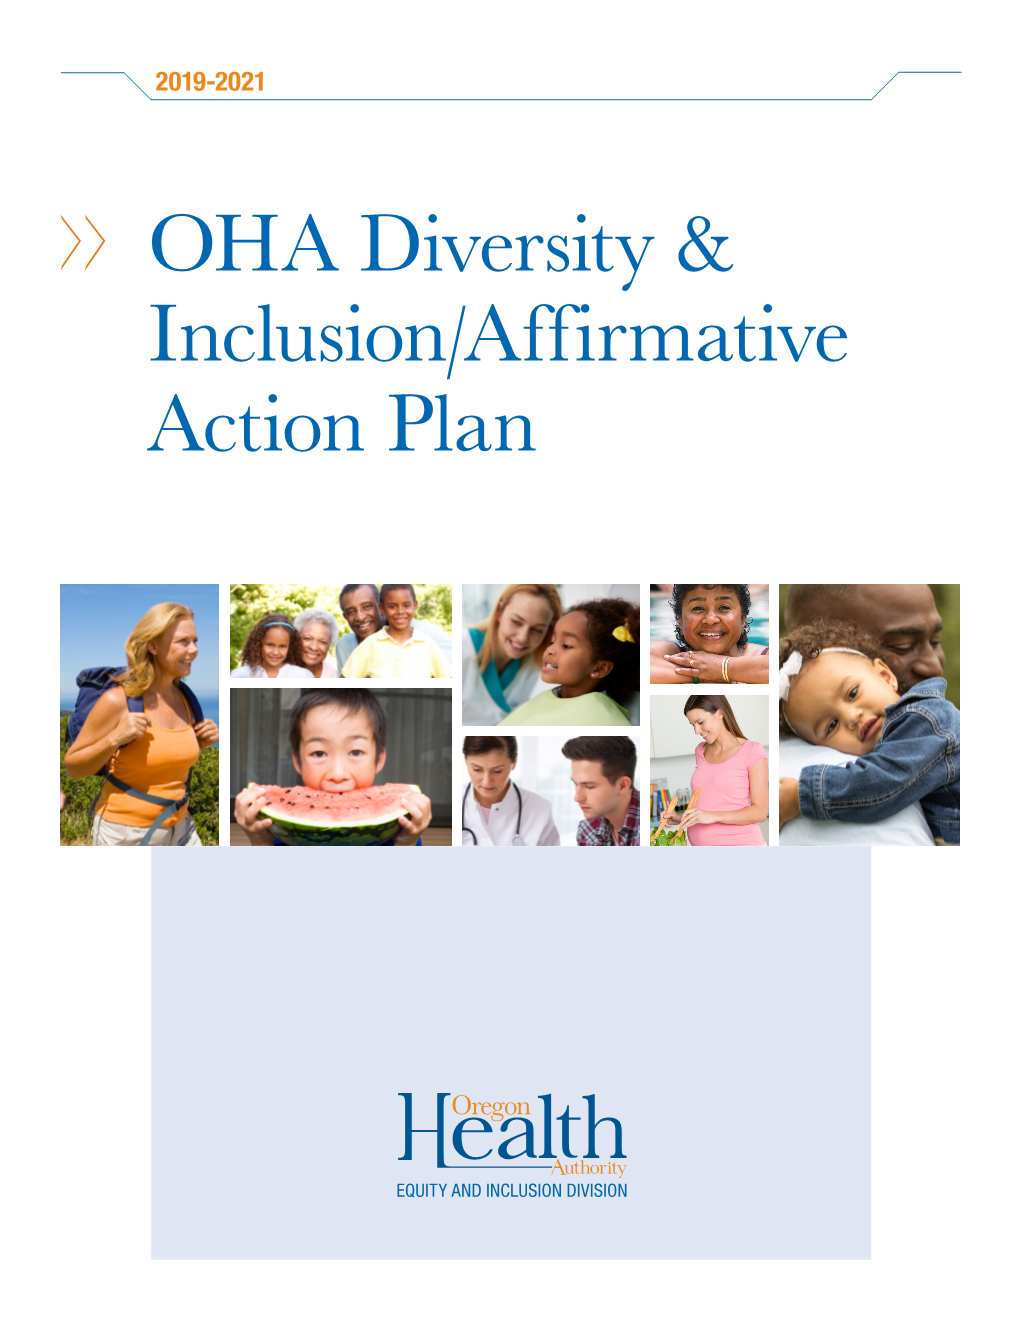 OHA 9807 Diversity & Inclusion/Affirmative Action Plan